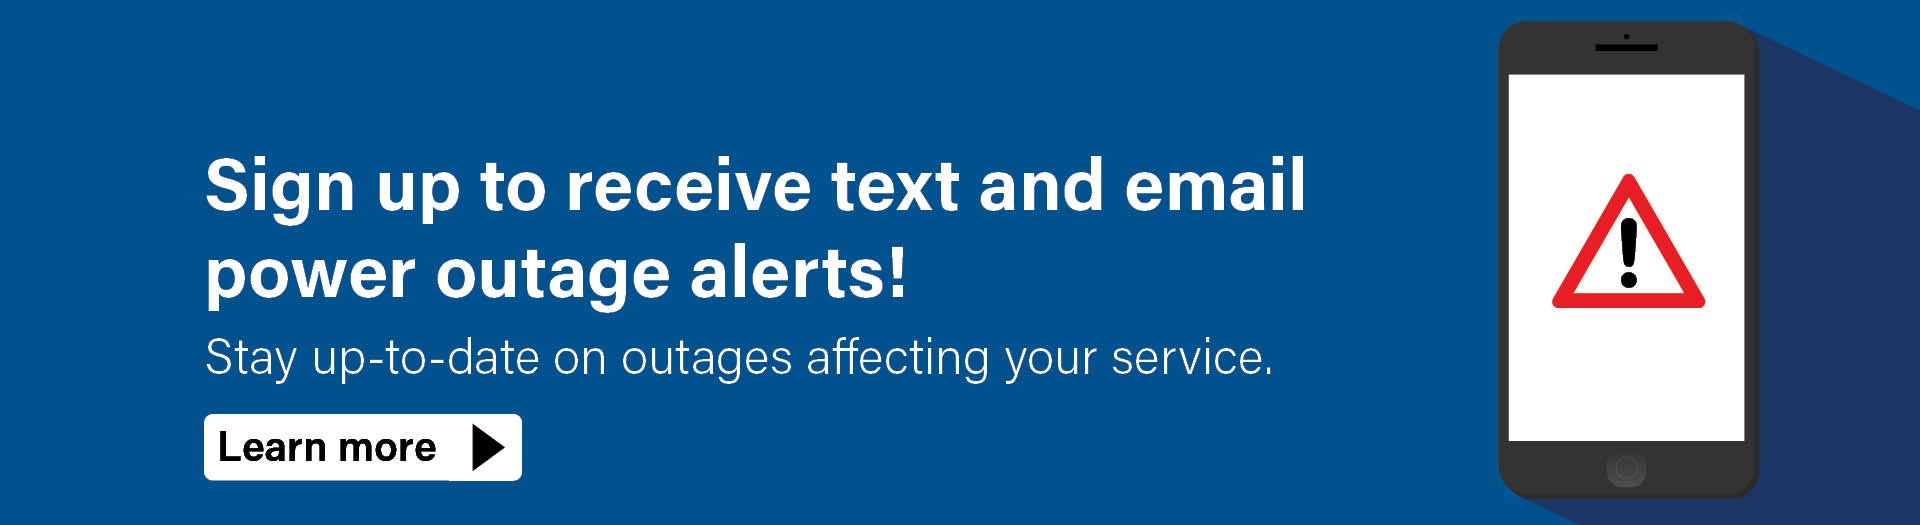 Sign up to receive text and email power outage alerts! Stay up-to-date on outages affecting your service. Learn More.